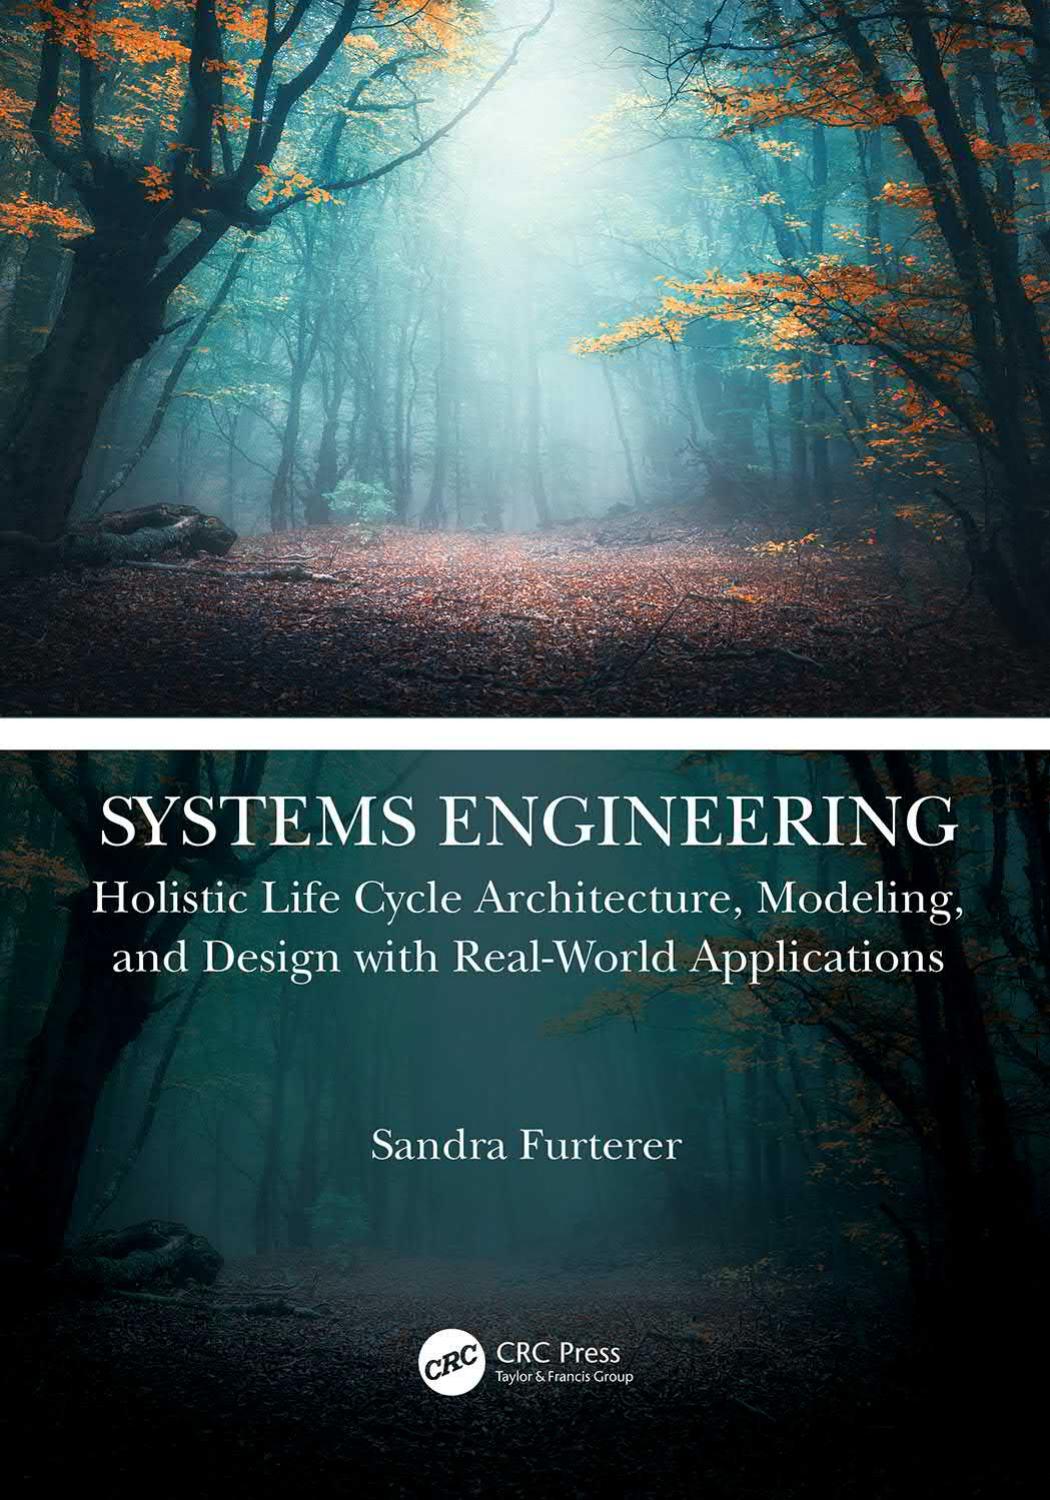 Systems Engineering; Holistic Life Cycle Architecture, Modeling, and Design with Real-World Applications